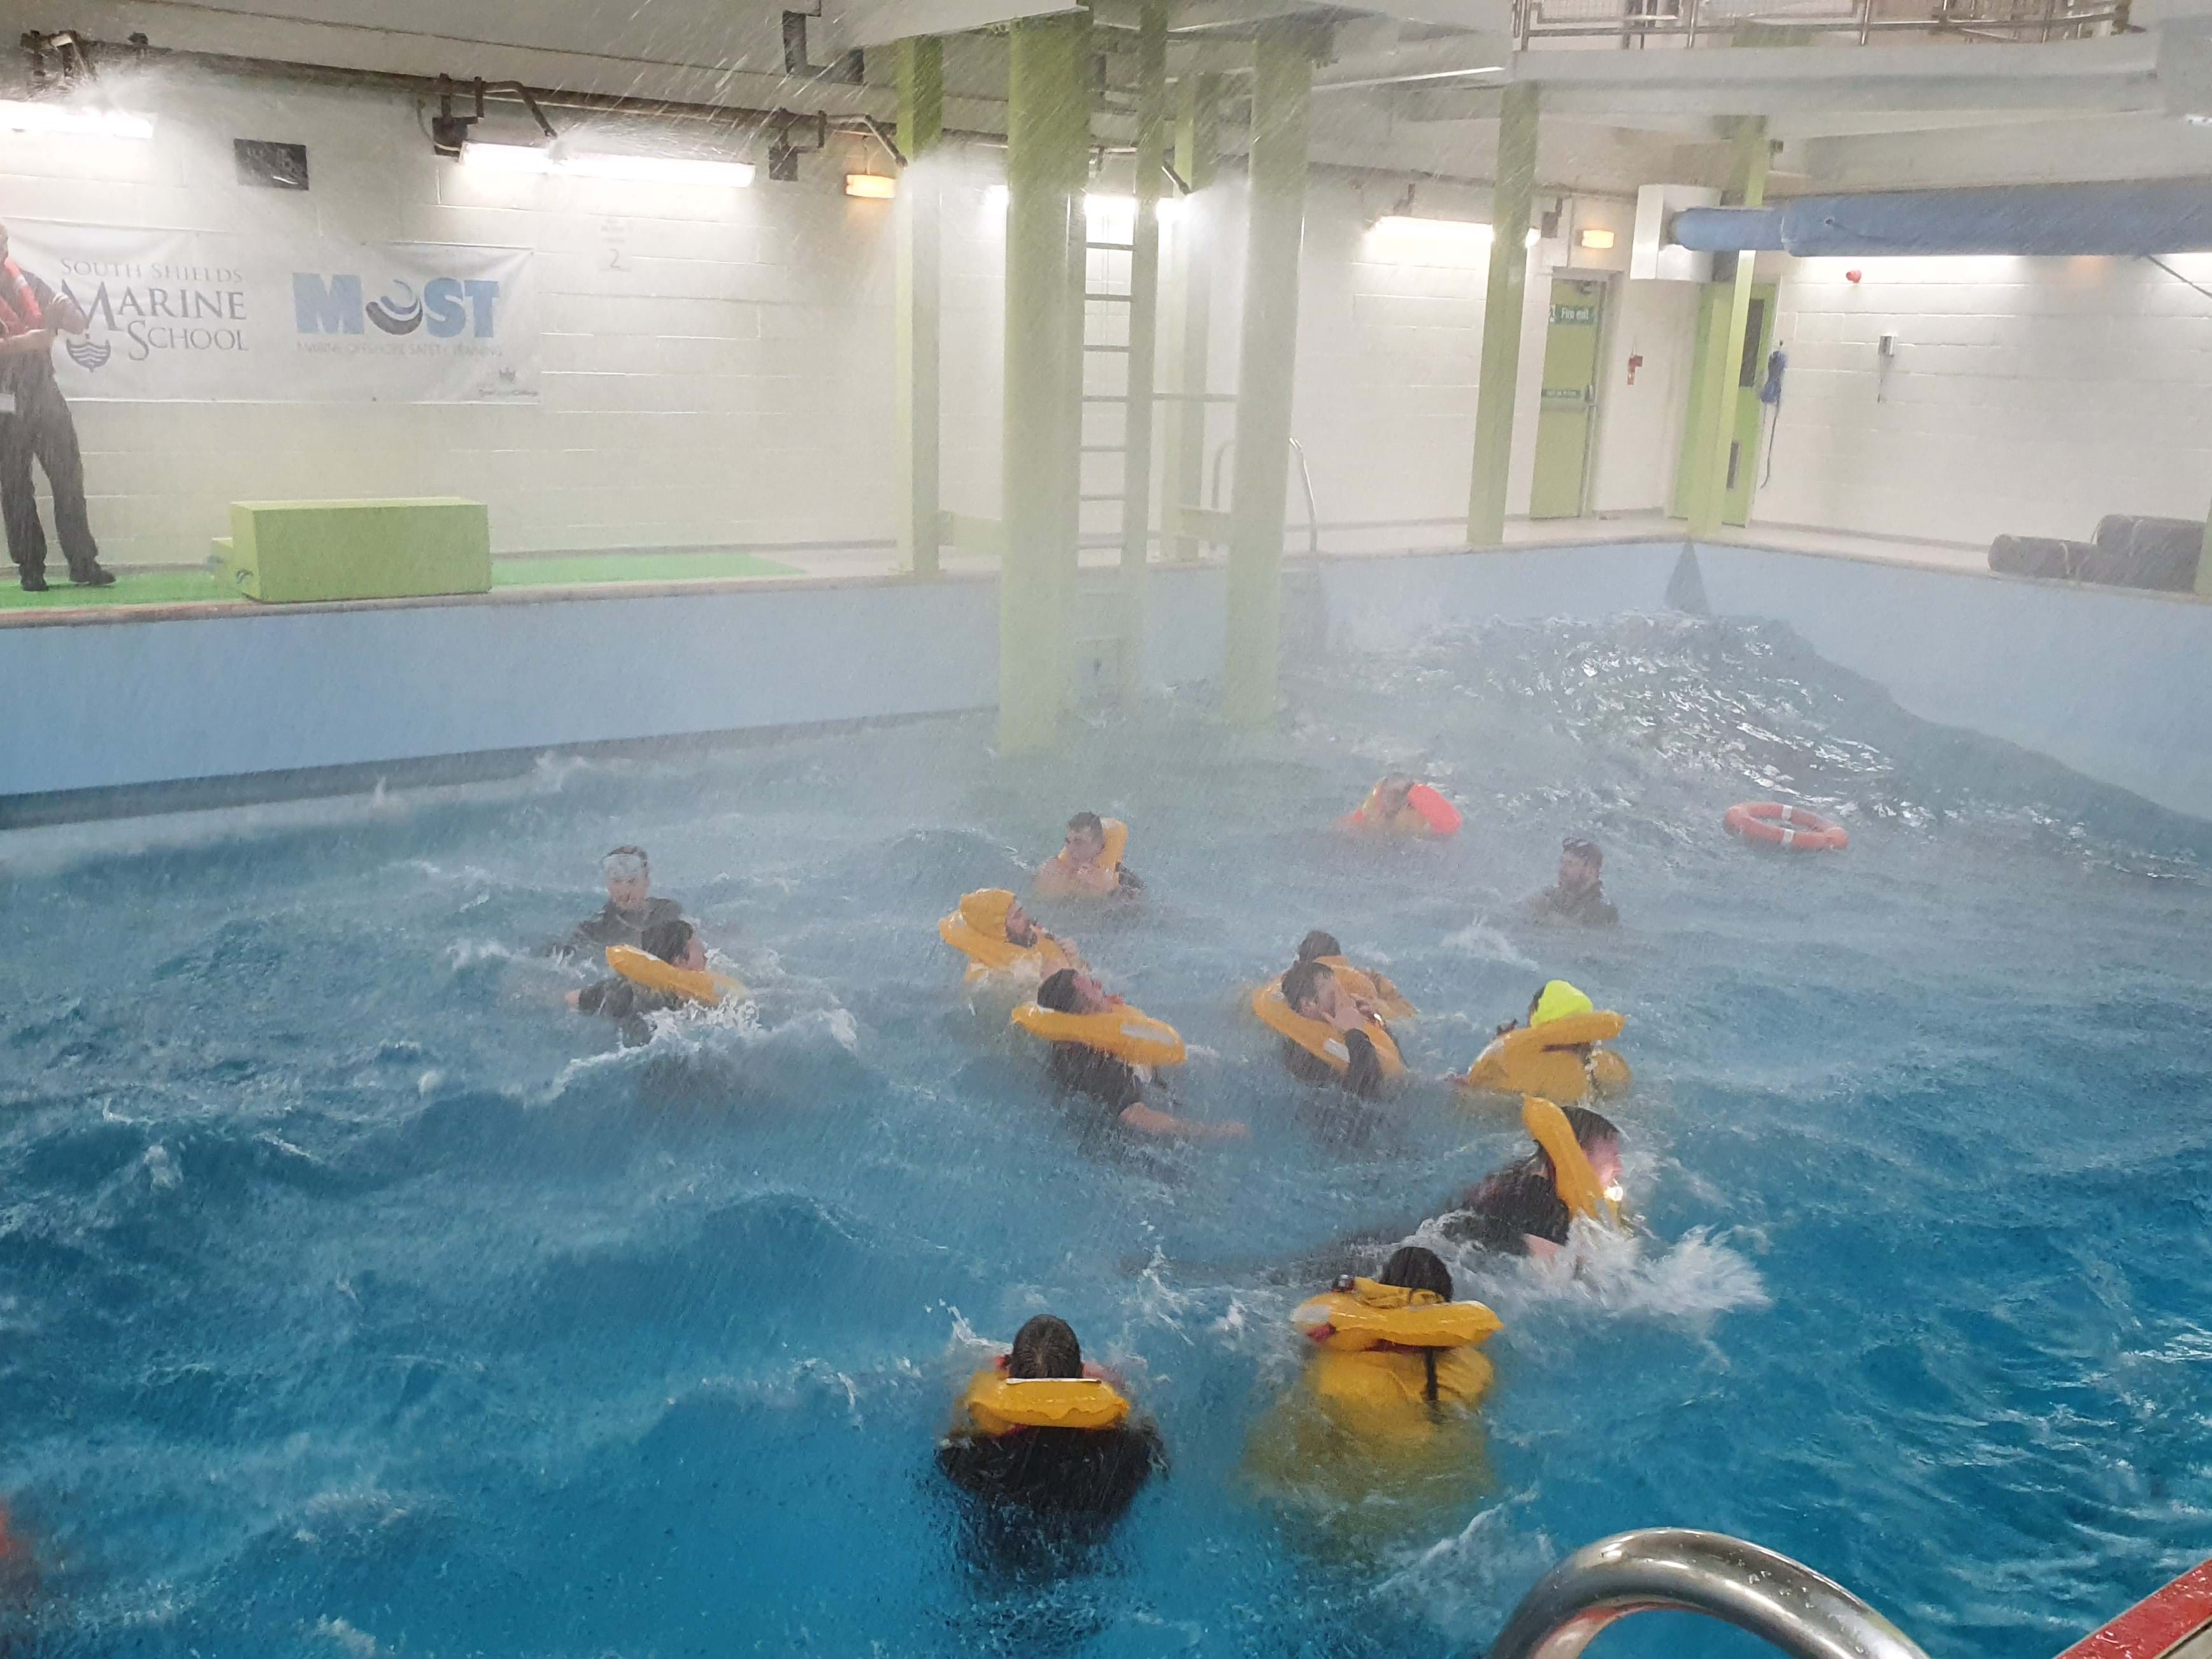 A group of men in a training swimming pool with flotation devices on as part of a training exercise.